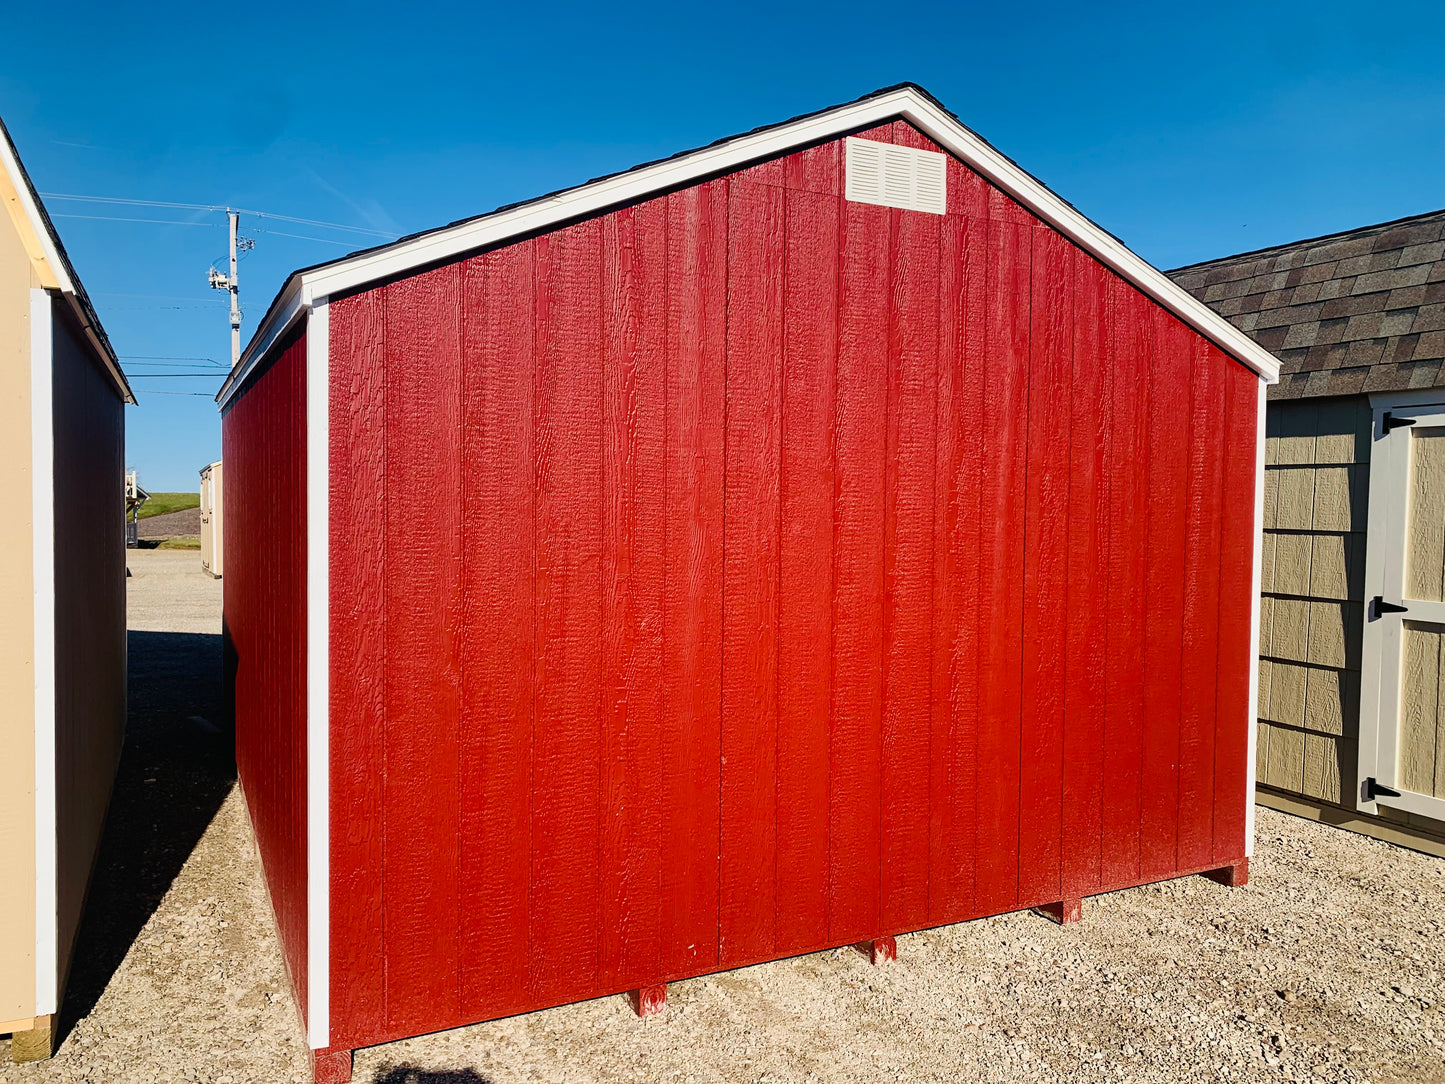 12x16 Special Buy Value Gable 6' Sidewalls Shed - PAINT